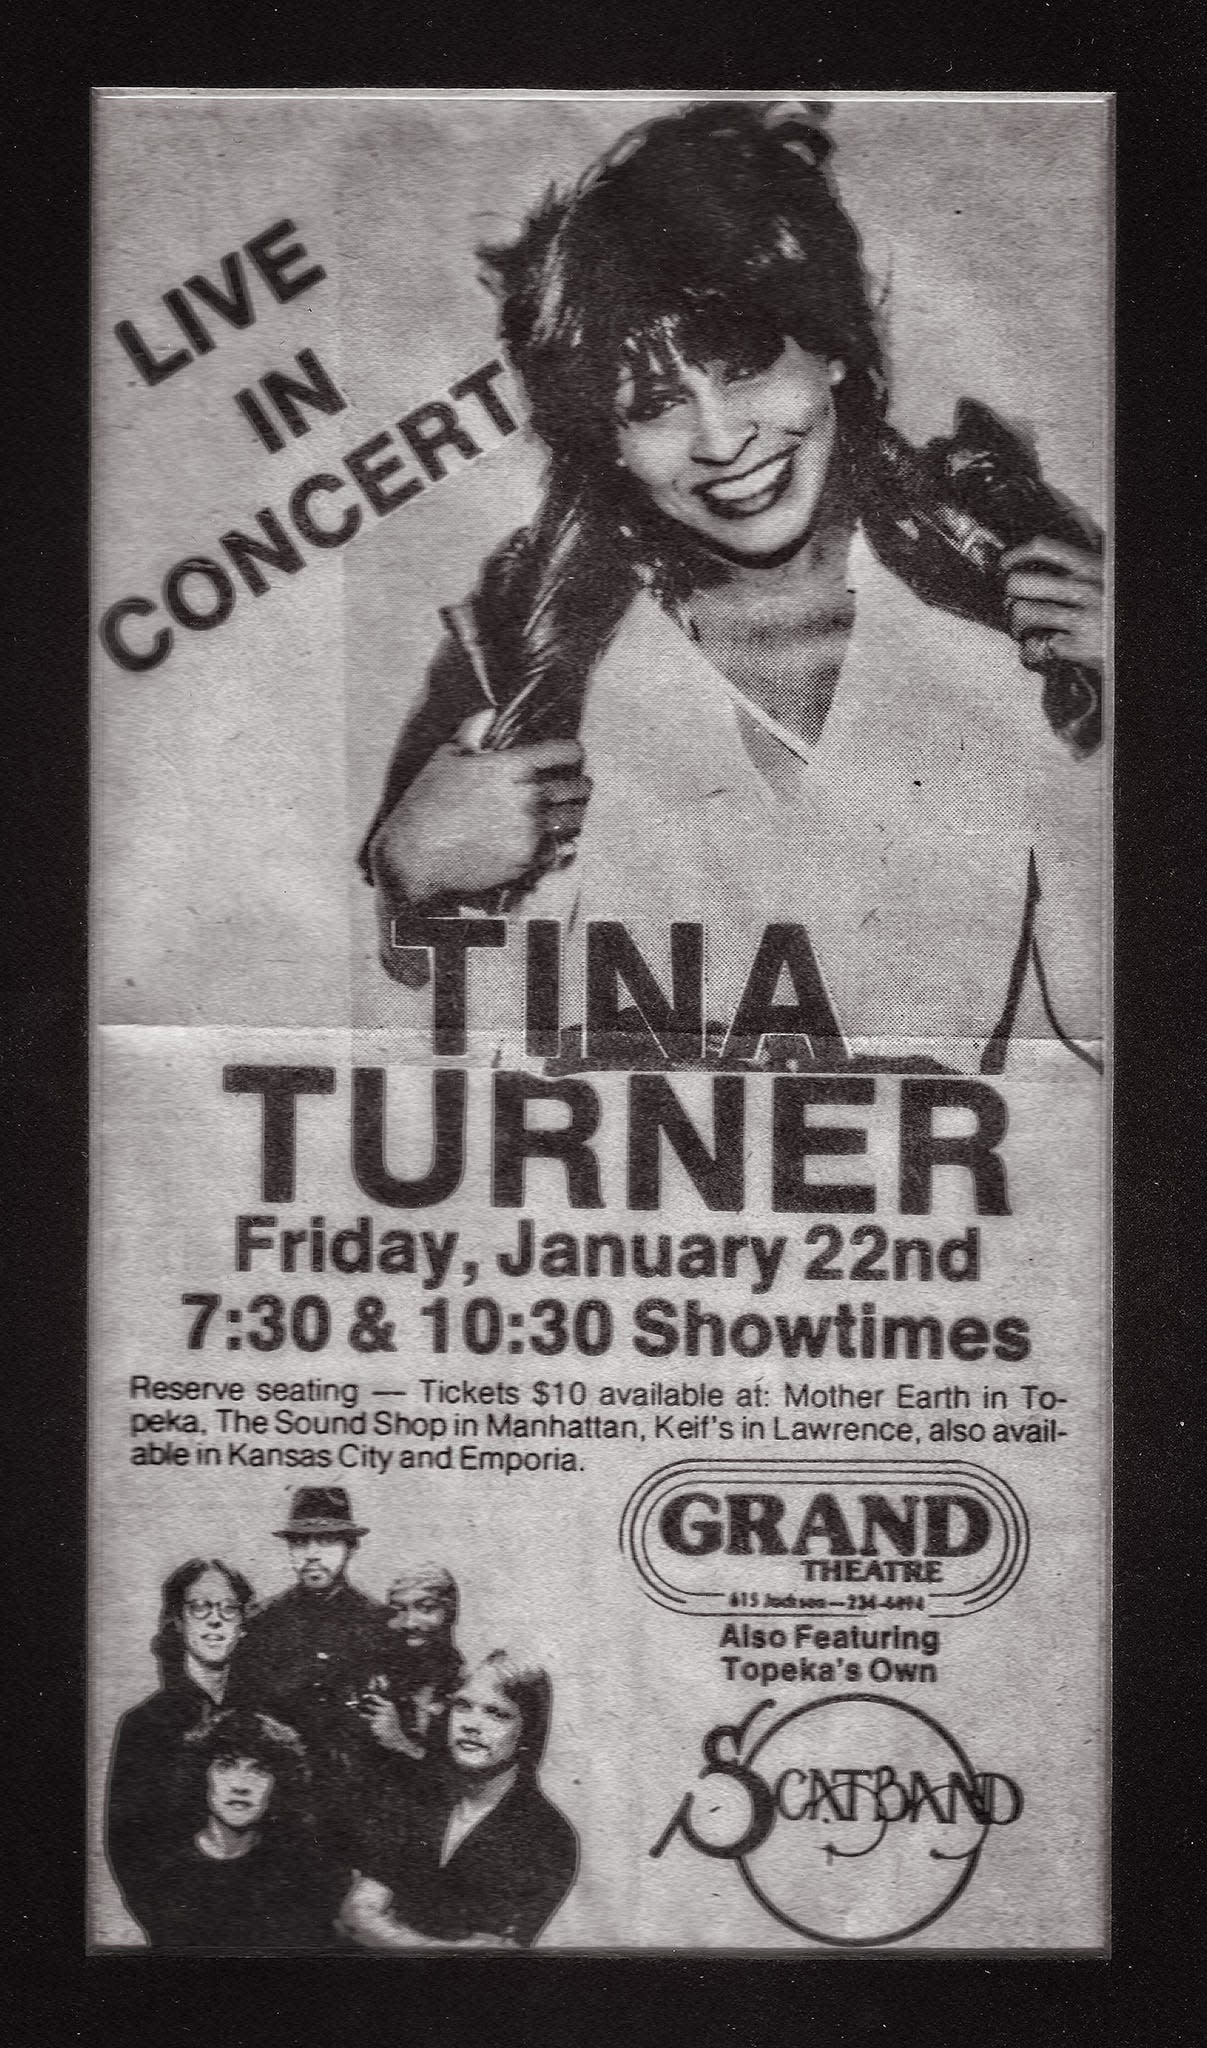 This poster advertised a Jan. 22, 1982, performance in Topeka by rock star Tina Turner.